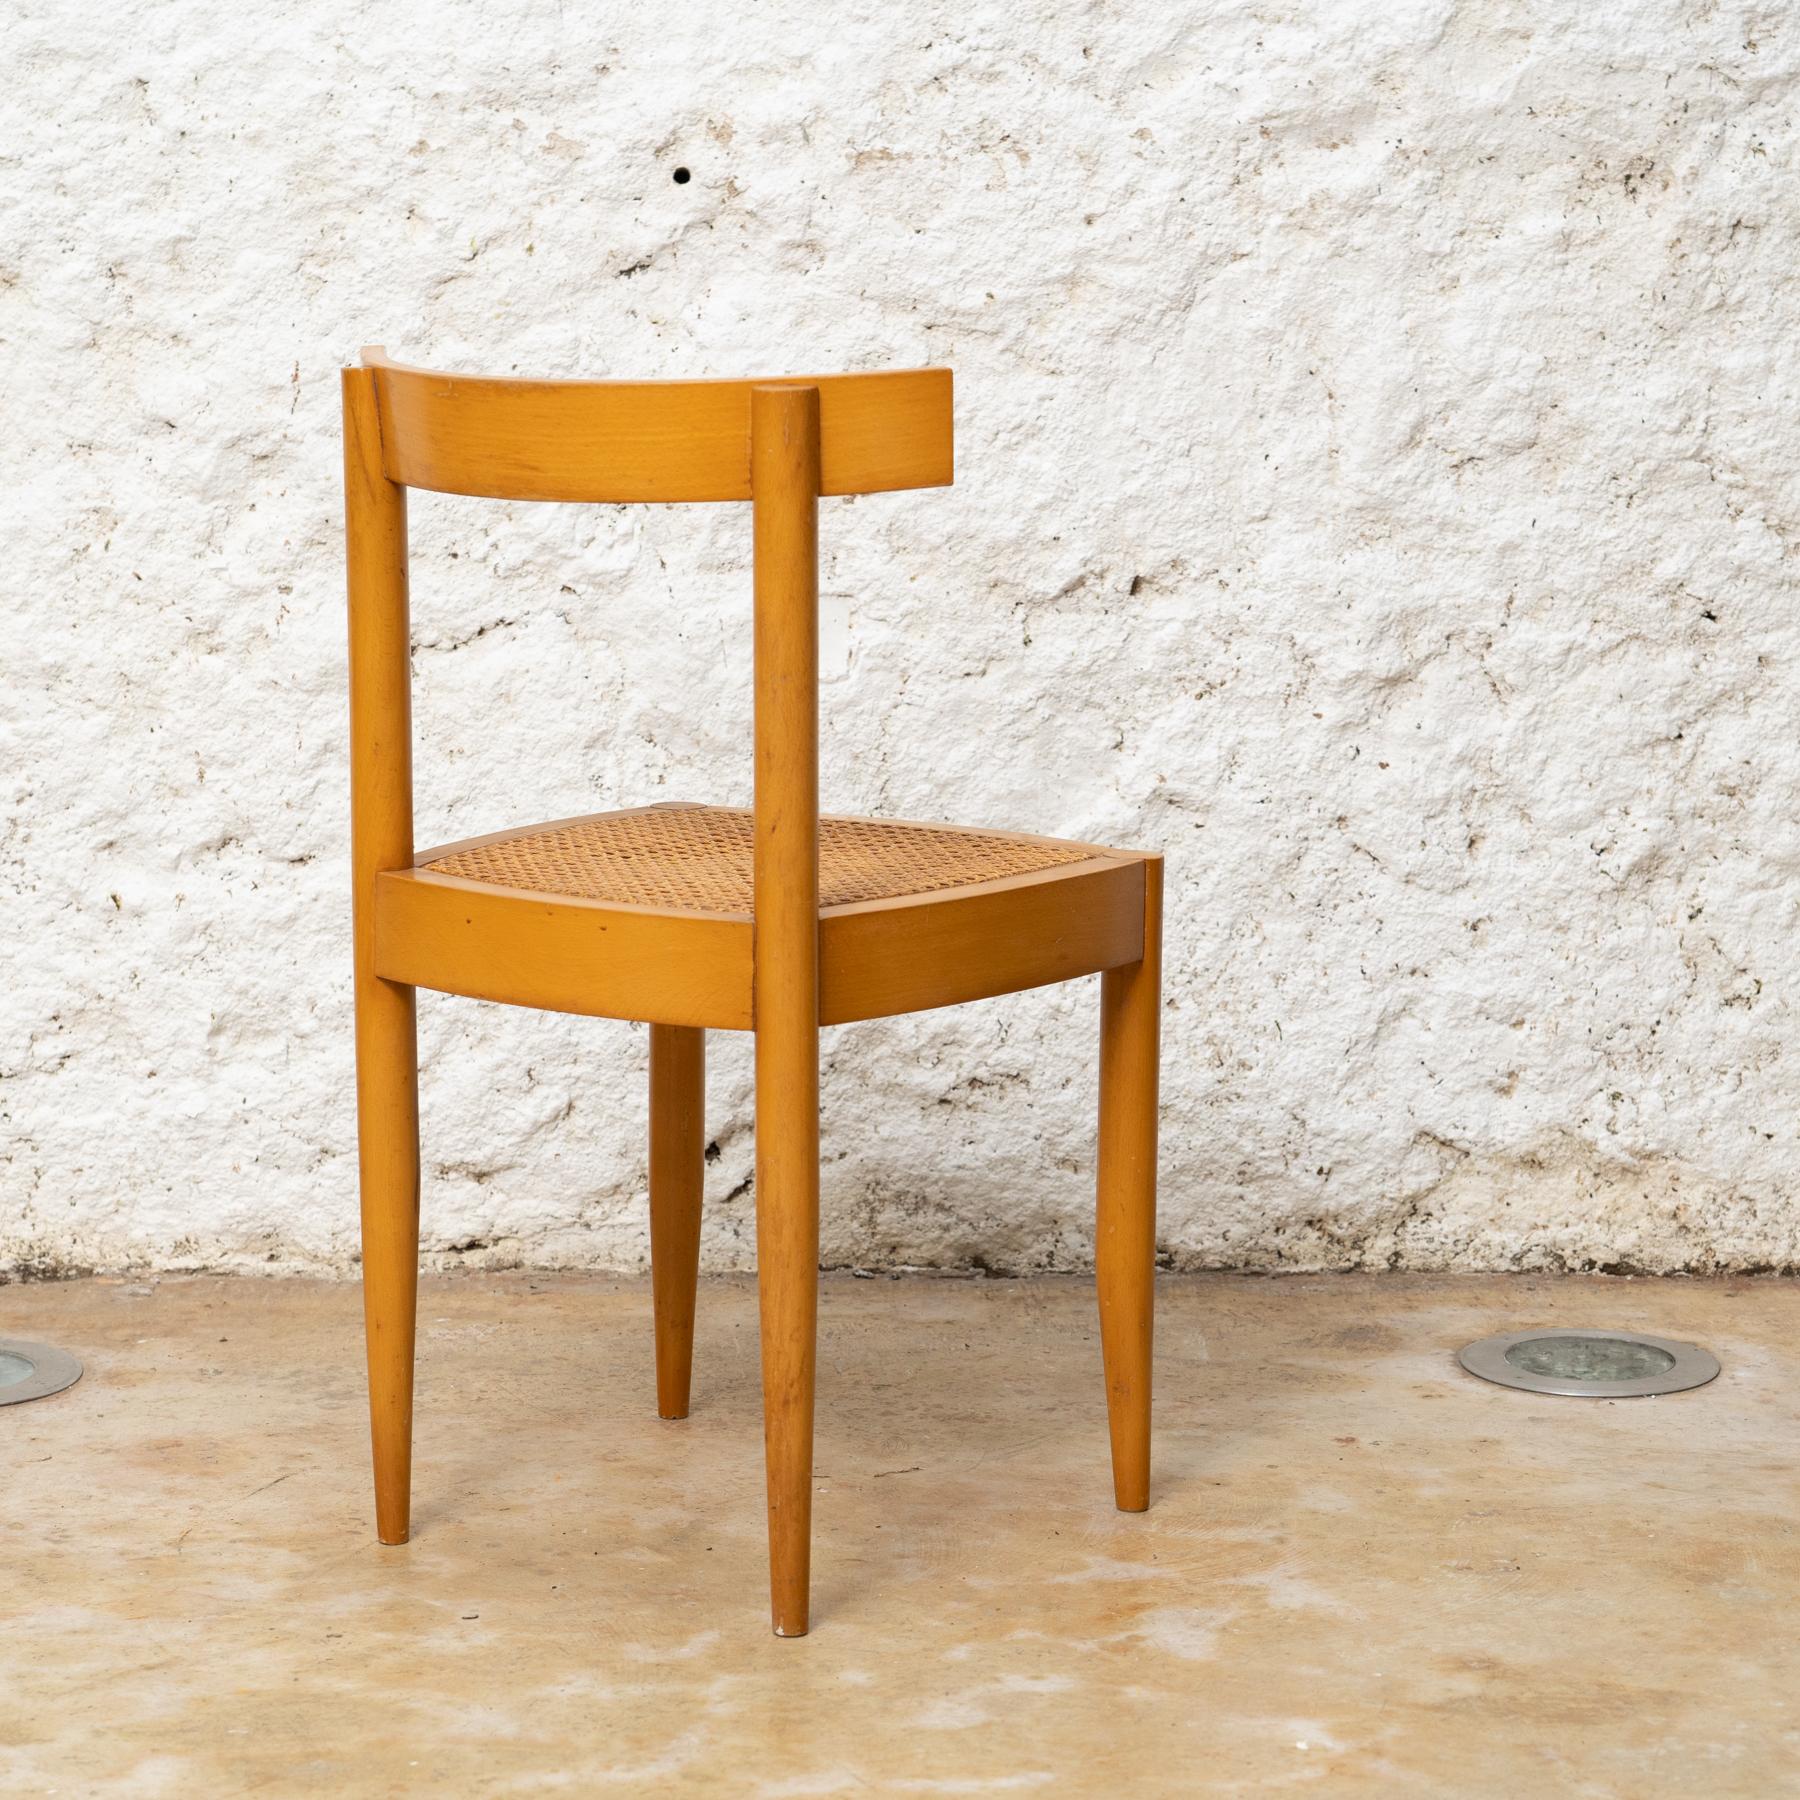 Spanish Timeless Design: 'Reno' Chair by Correa and Milà for Gres, Spain, circa 1961 For Sale